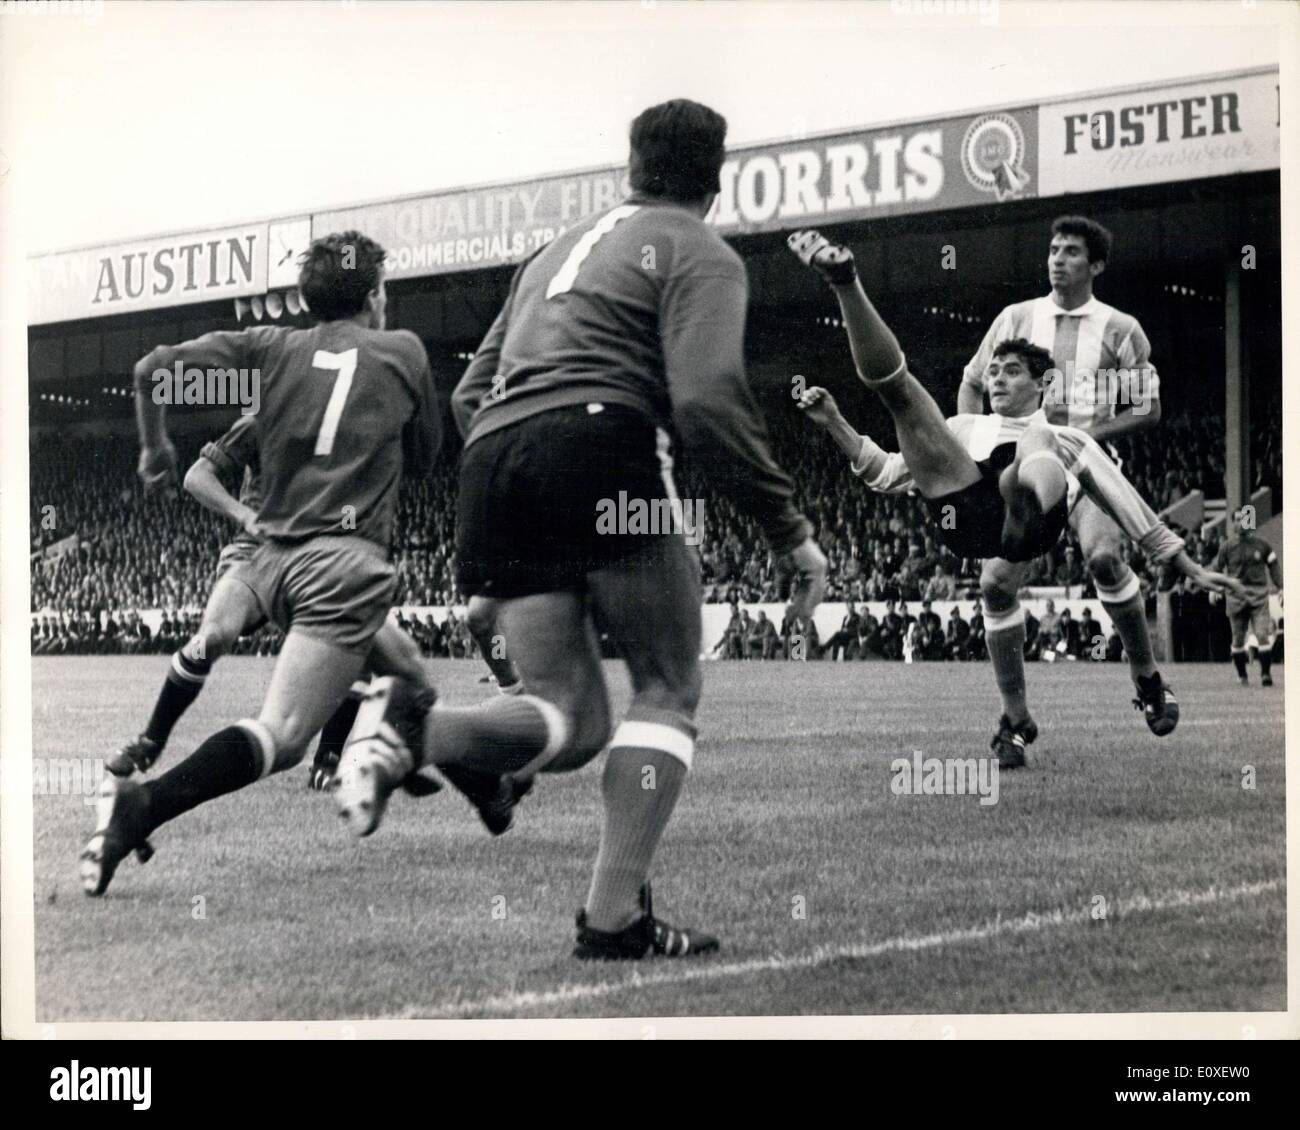 Jul. 14, 1966 - Football. The 1966 World Cup ?Spain v. Argentine at Willa Park, Birmingham. Albrecht, of Argentine, clears off the line with a scissors kick. Ufart (No 7, Spain) rushes in an Argentine goalkeeper Roma (No 1) looks on. Stock Photo